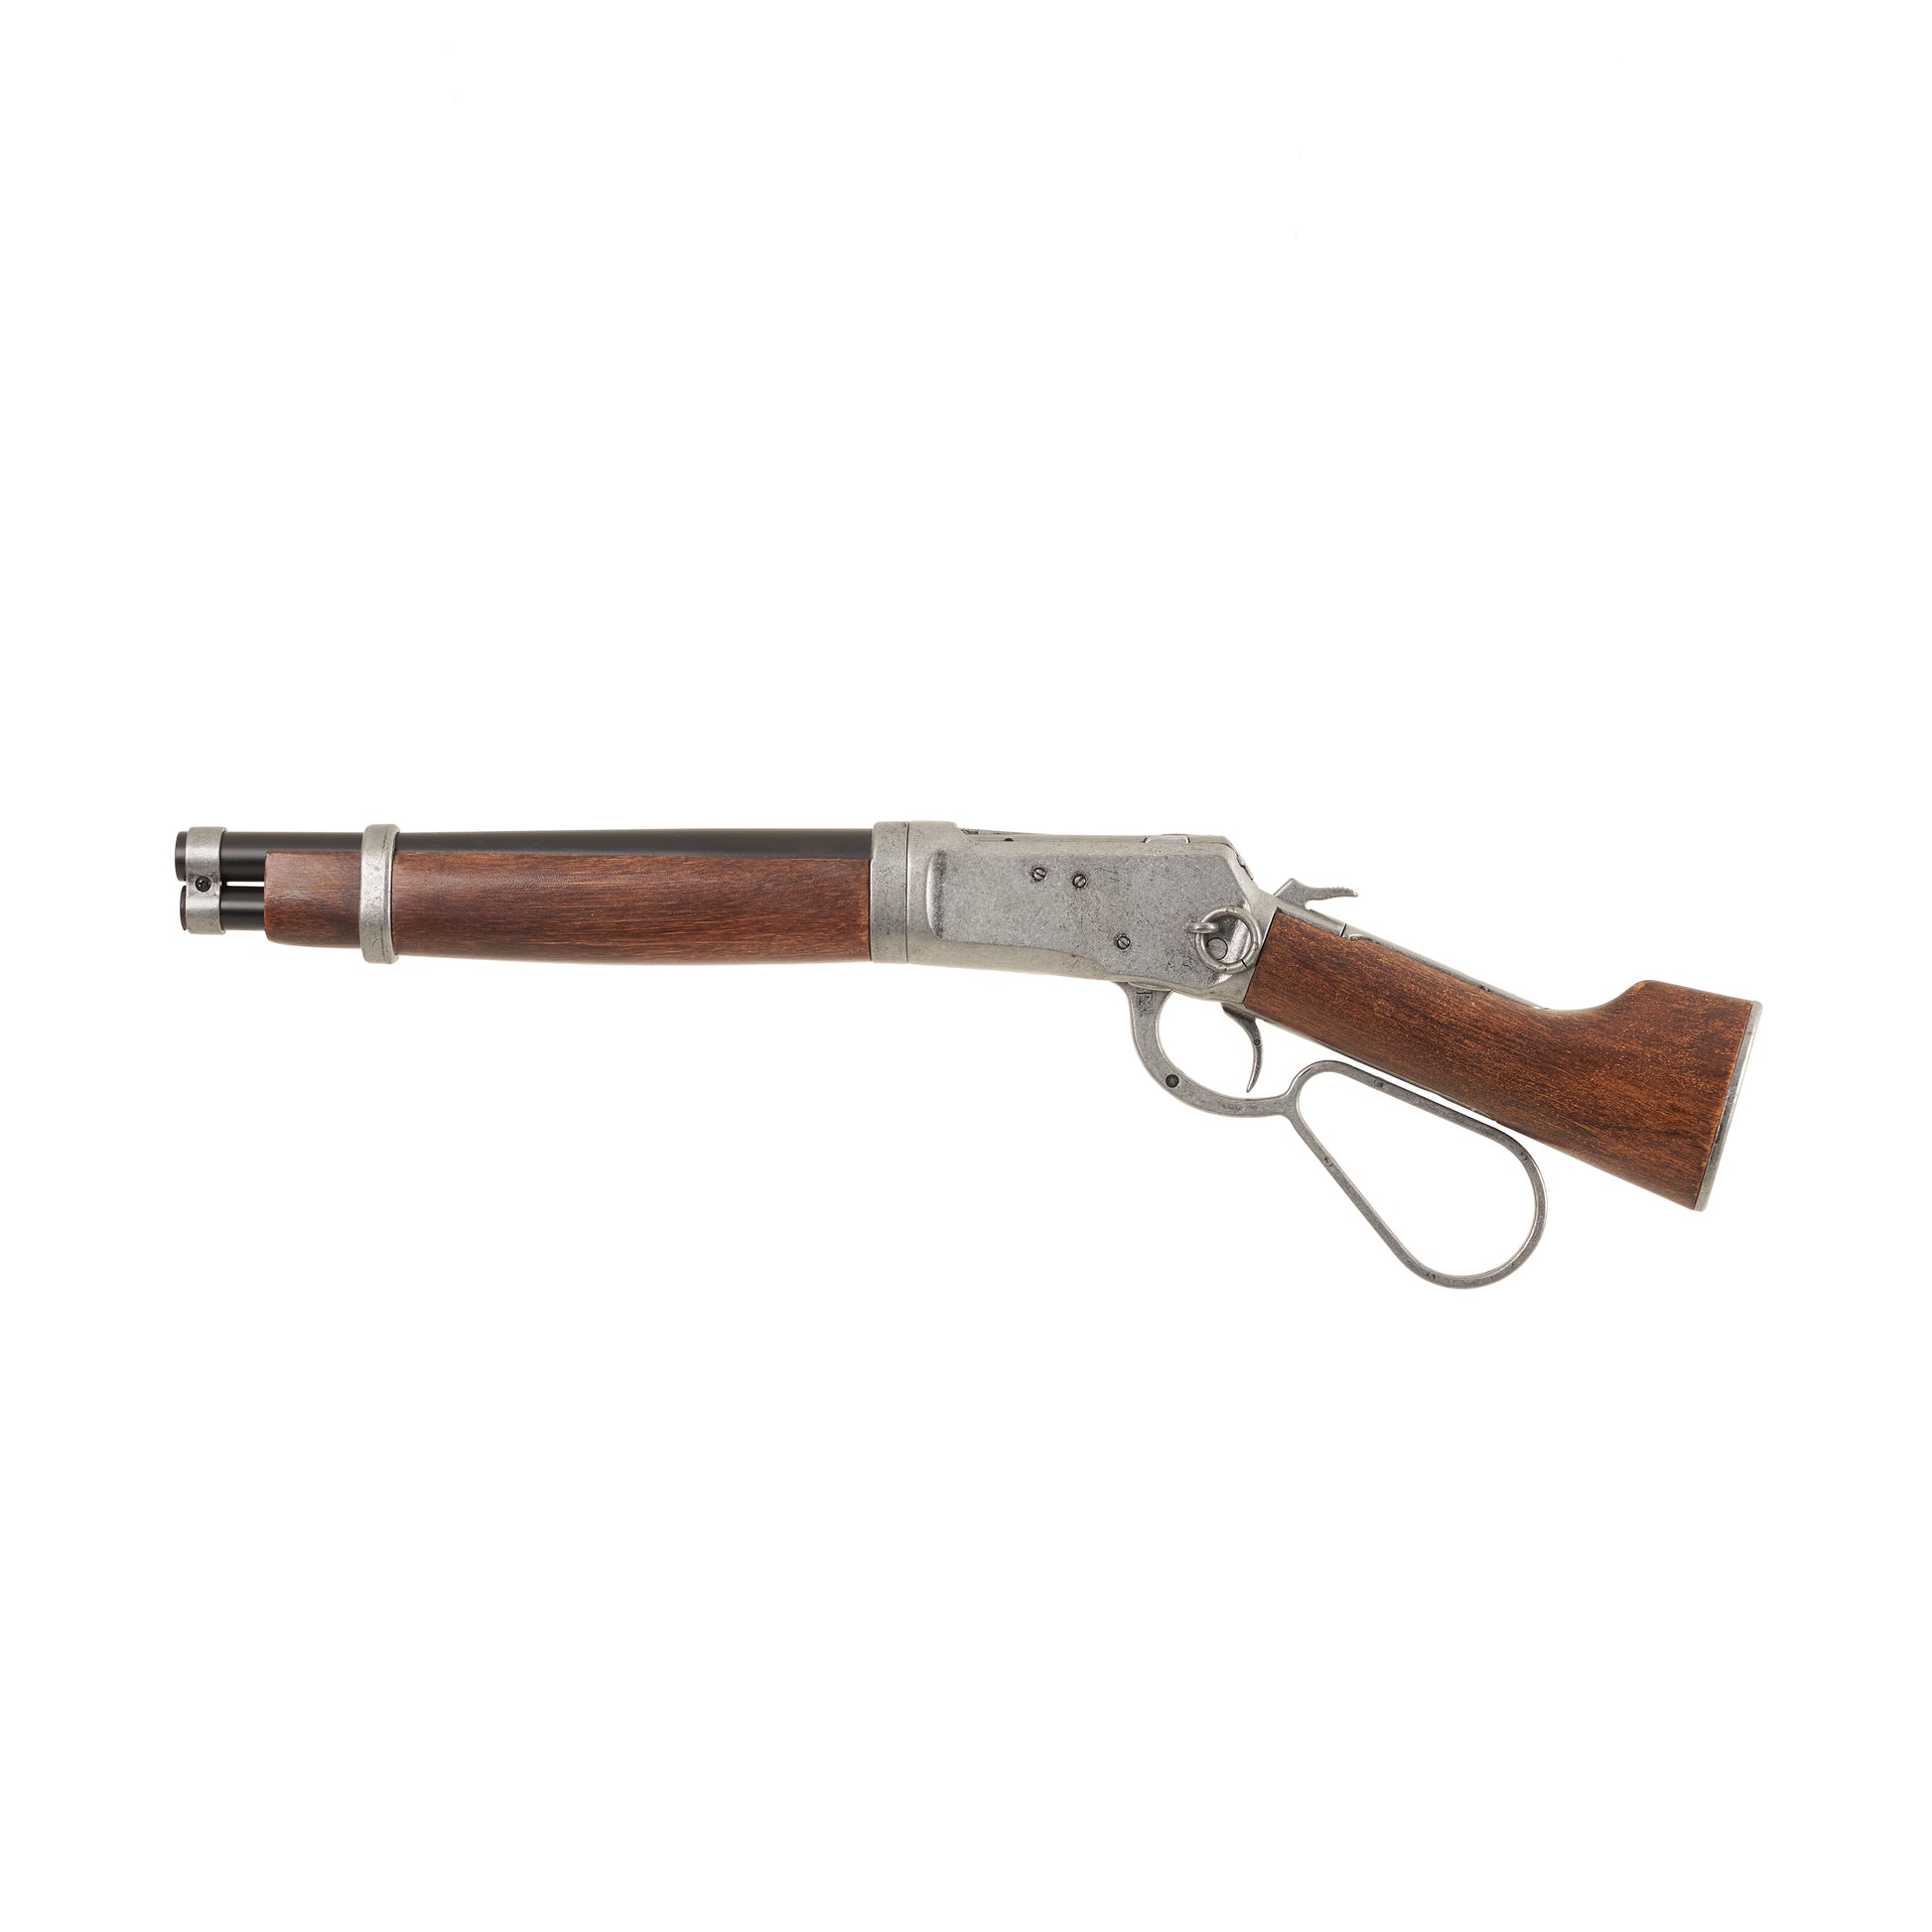 Left side view of gray Mare's Leg rifle with gray loop lever, mechanisms, and trim, wood stock, and black barrel. 